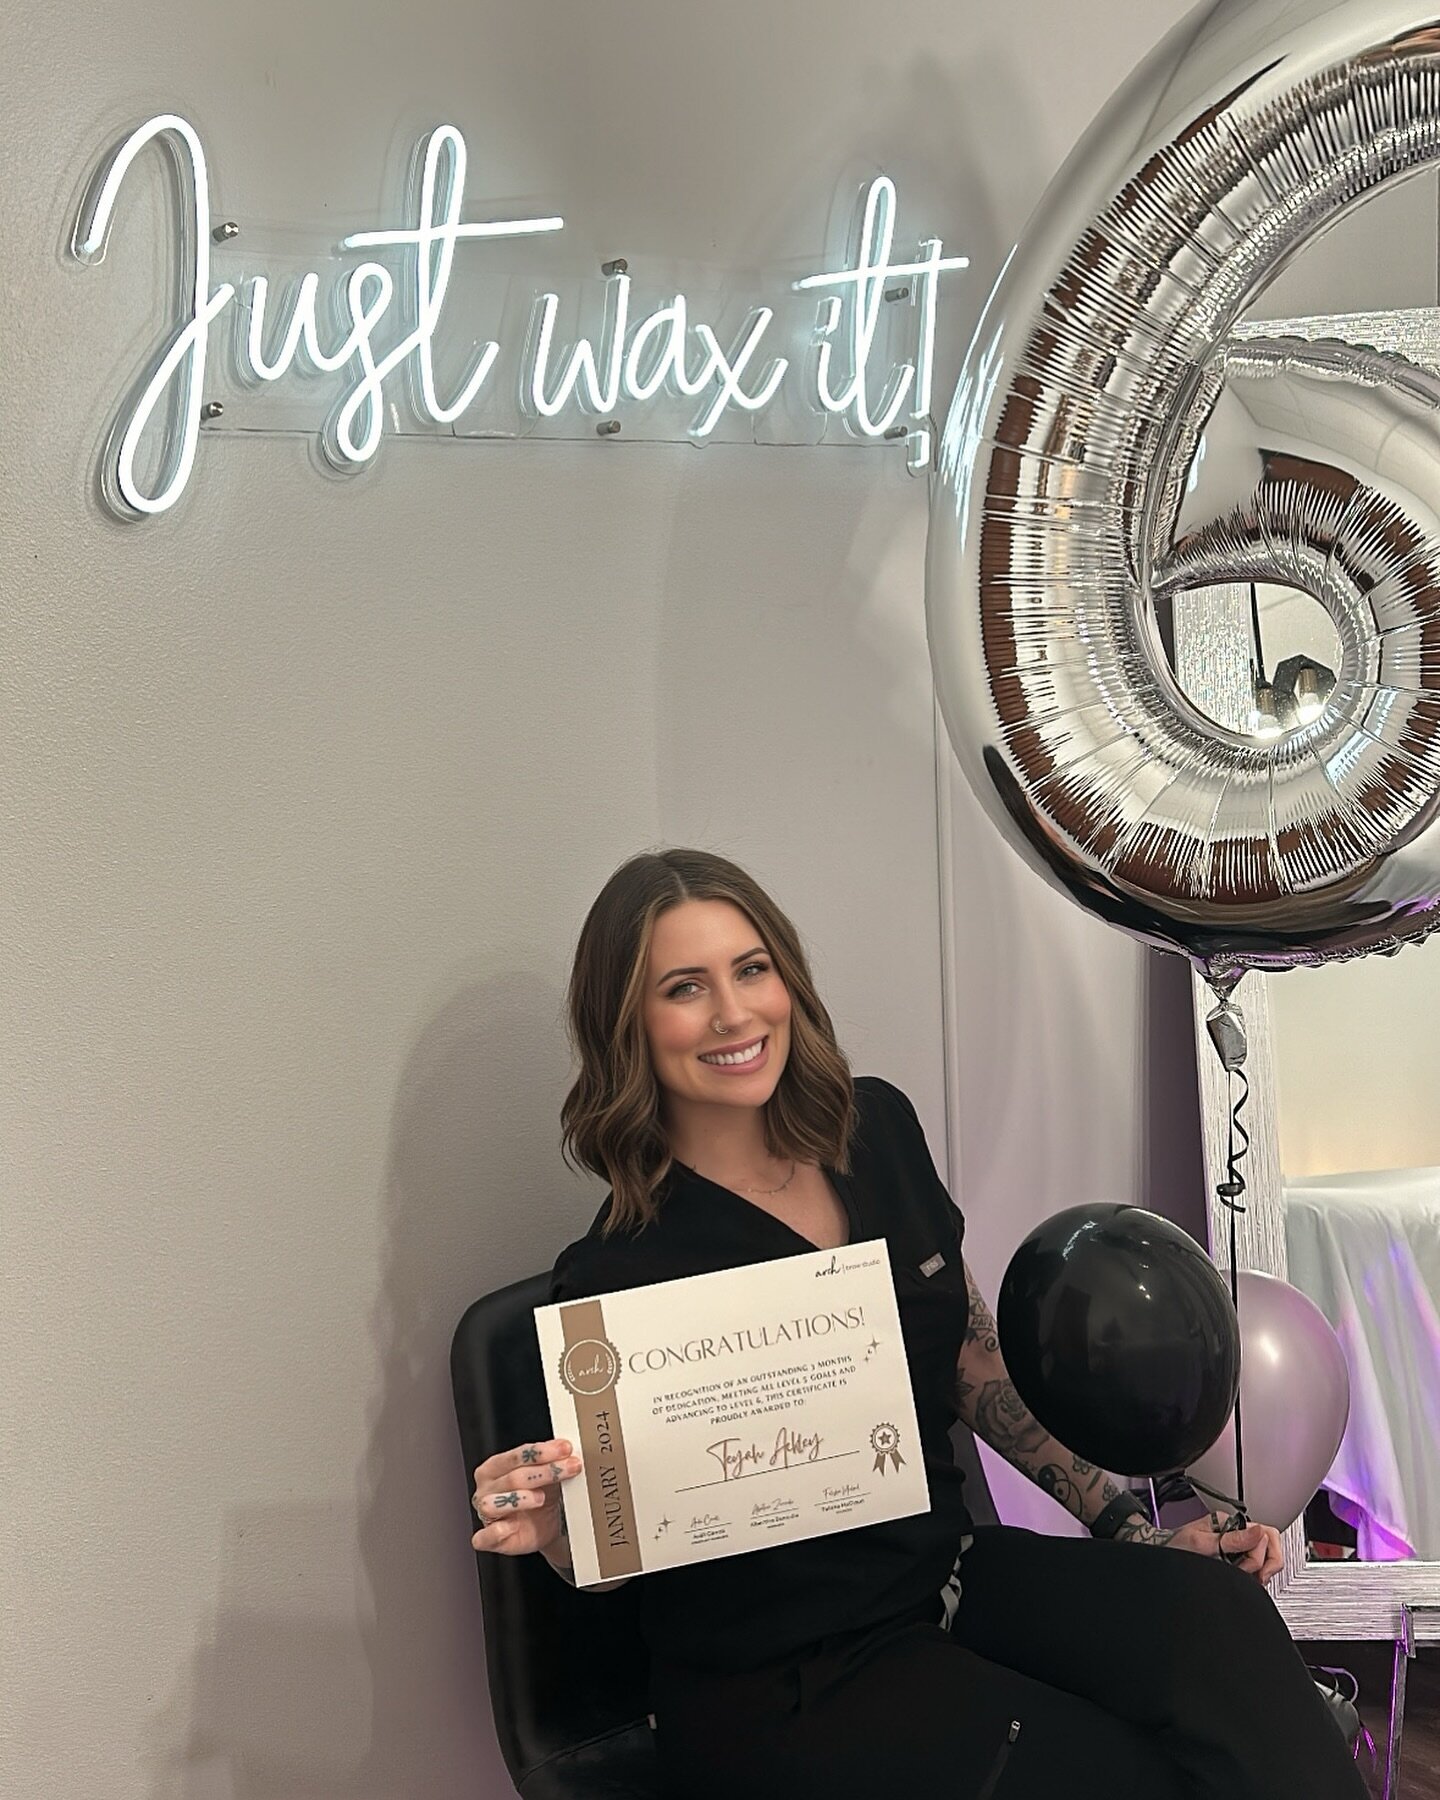 Please join us in congratulating Teyah on her promotion! She is now a level 6 Brow &amp; Skin Specialist at Arch Brow Studio! 

For the last 5 months since her return with us, she has been investing countless hours into advancing her skills and perfe